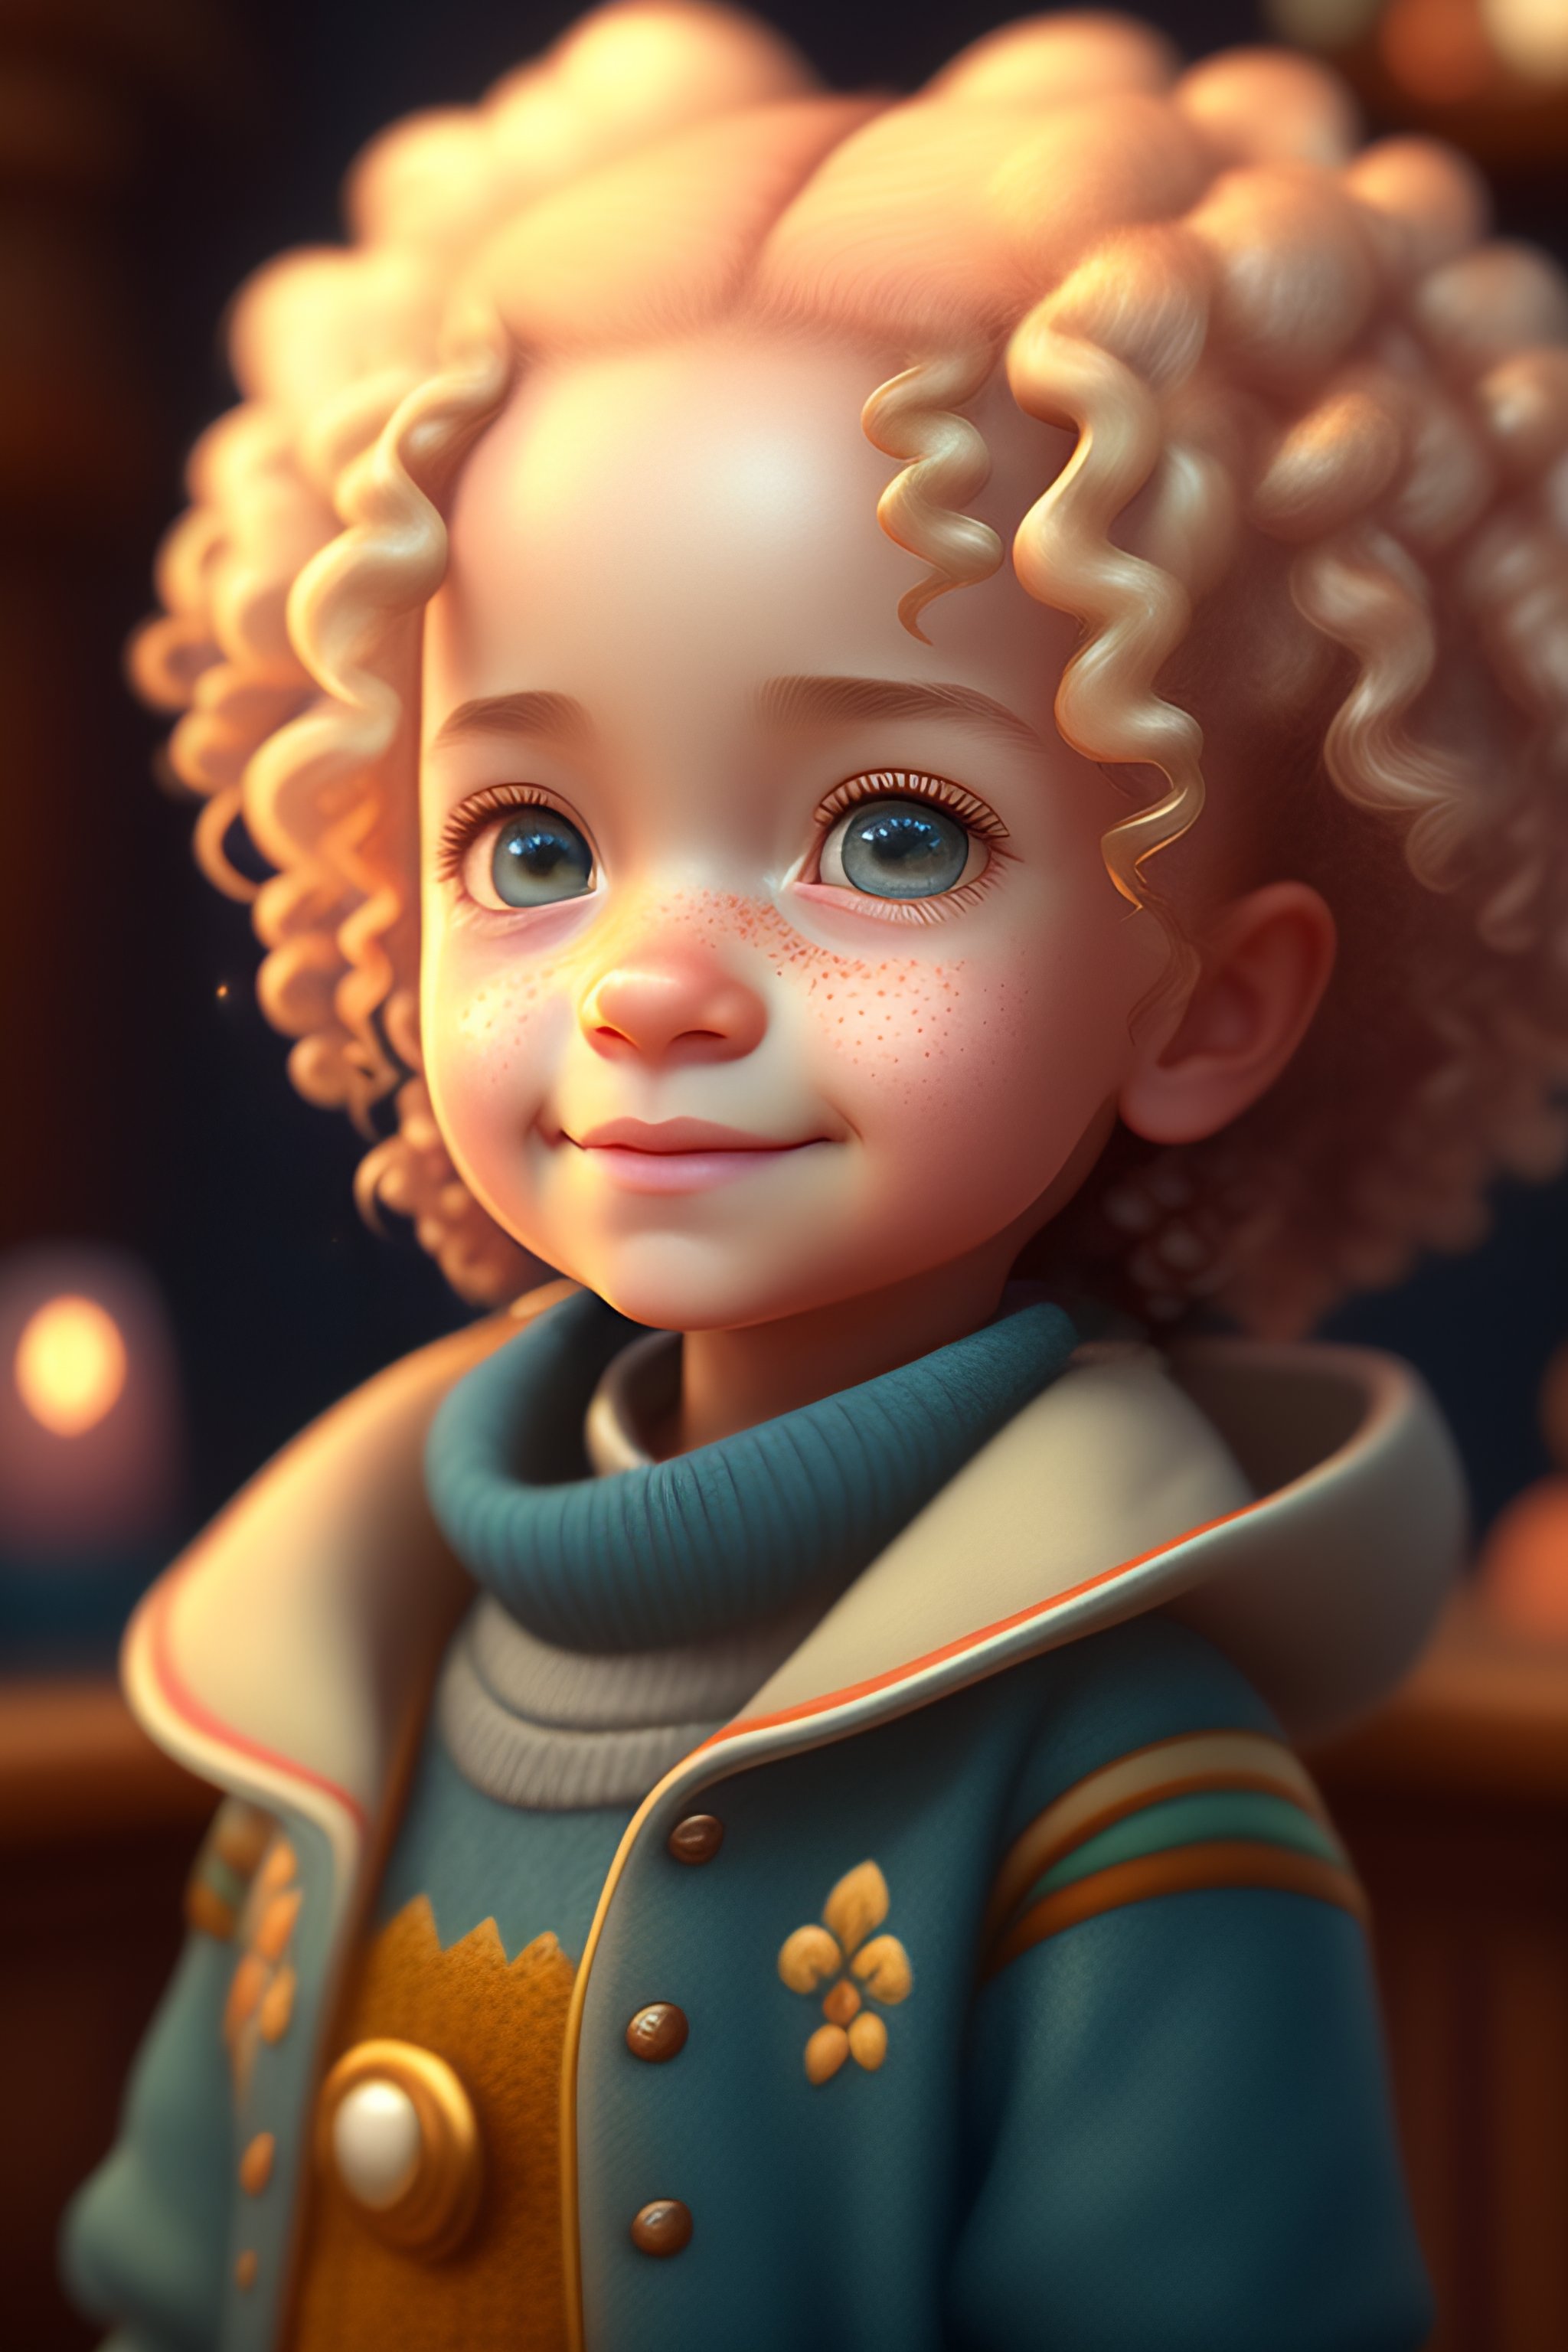 cartoon girl with blonde curly hair